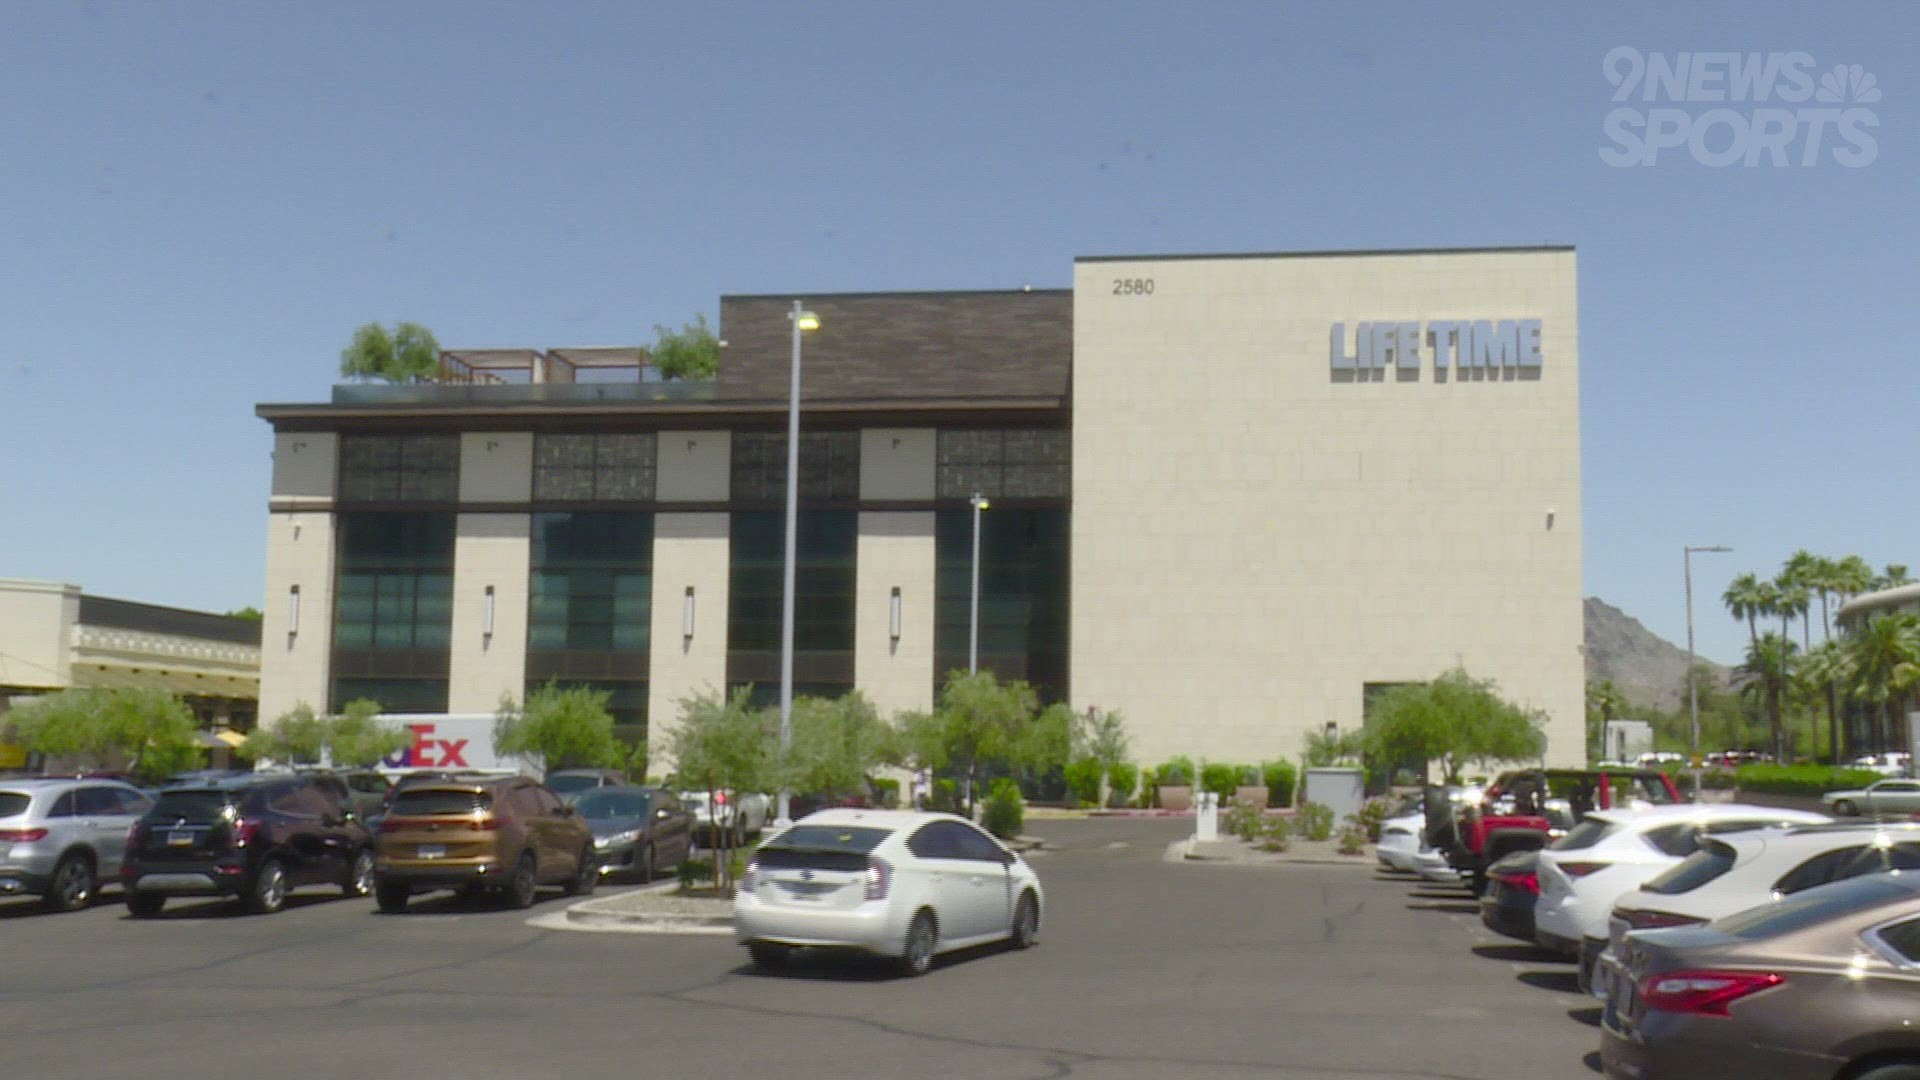 The Denver Nuggets practiced at a local Lifetime Fitness ahead of Thursday night's Game 6.